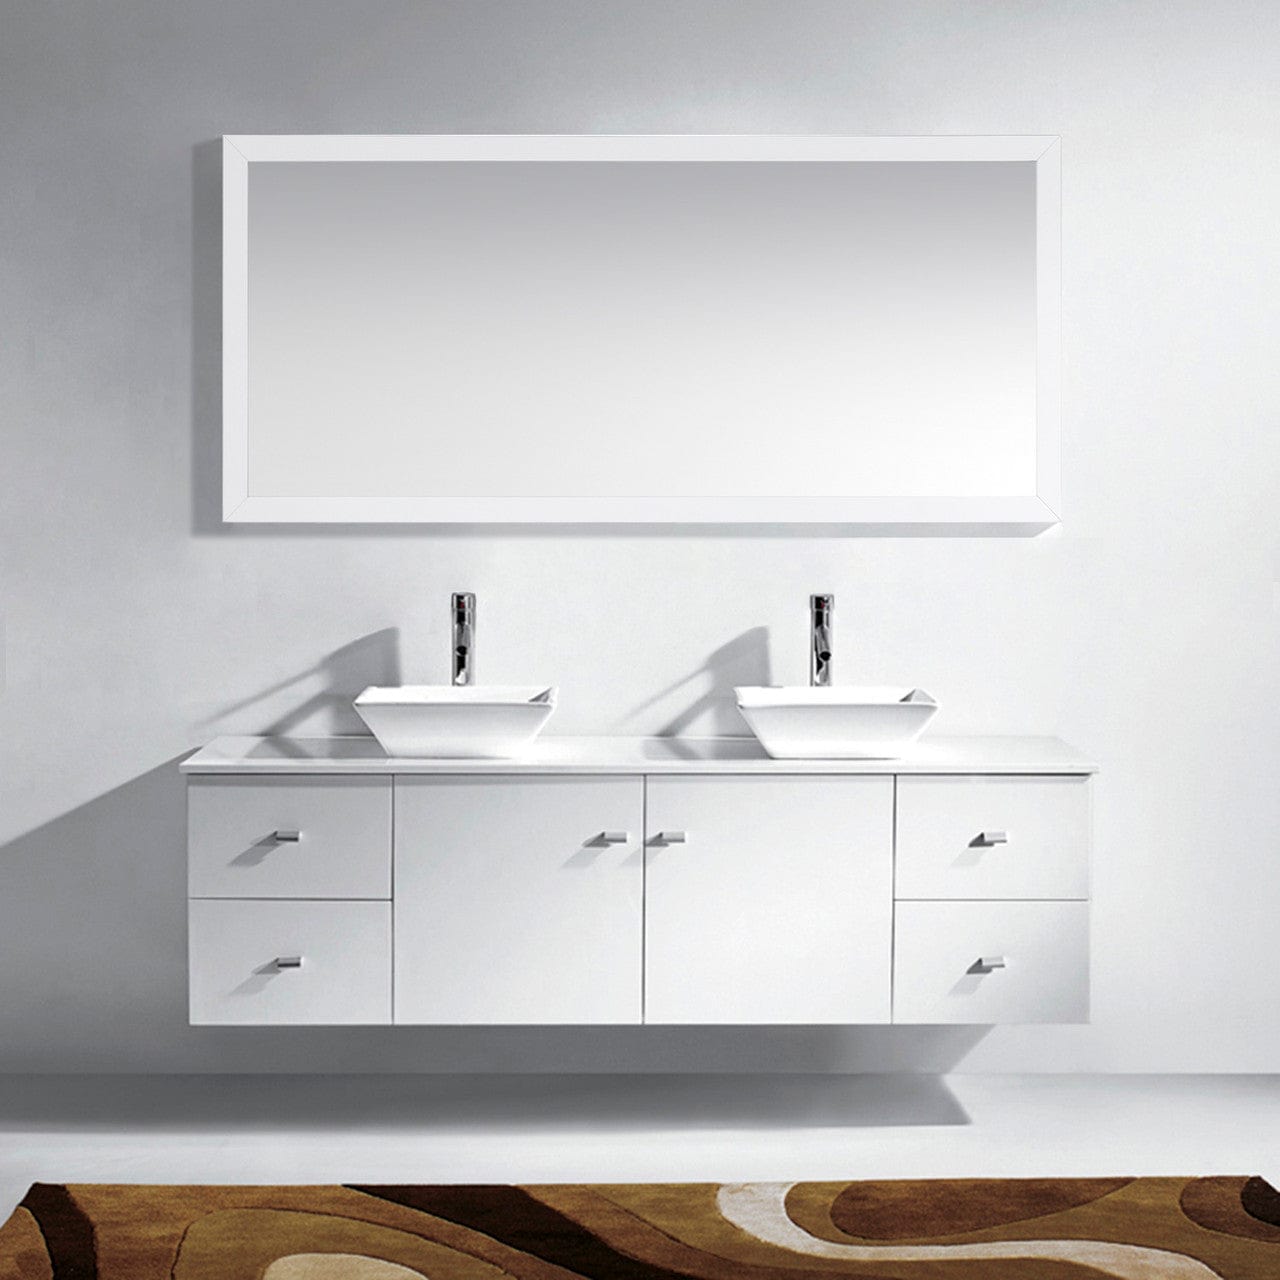  Virtu USA Clarissa 72 Double Bathroom Vanity Set in White w/ White Stone Counter-Top | Square Basin front view close up